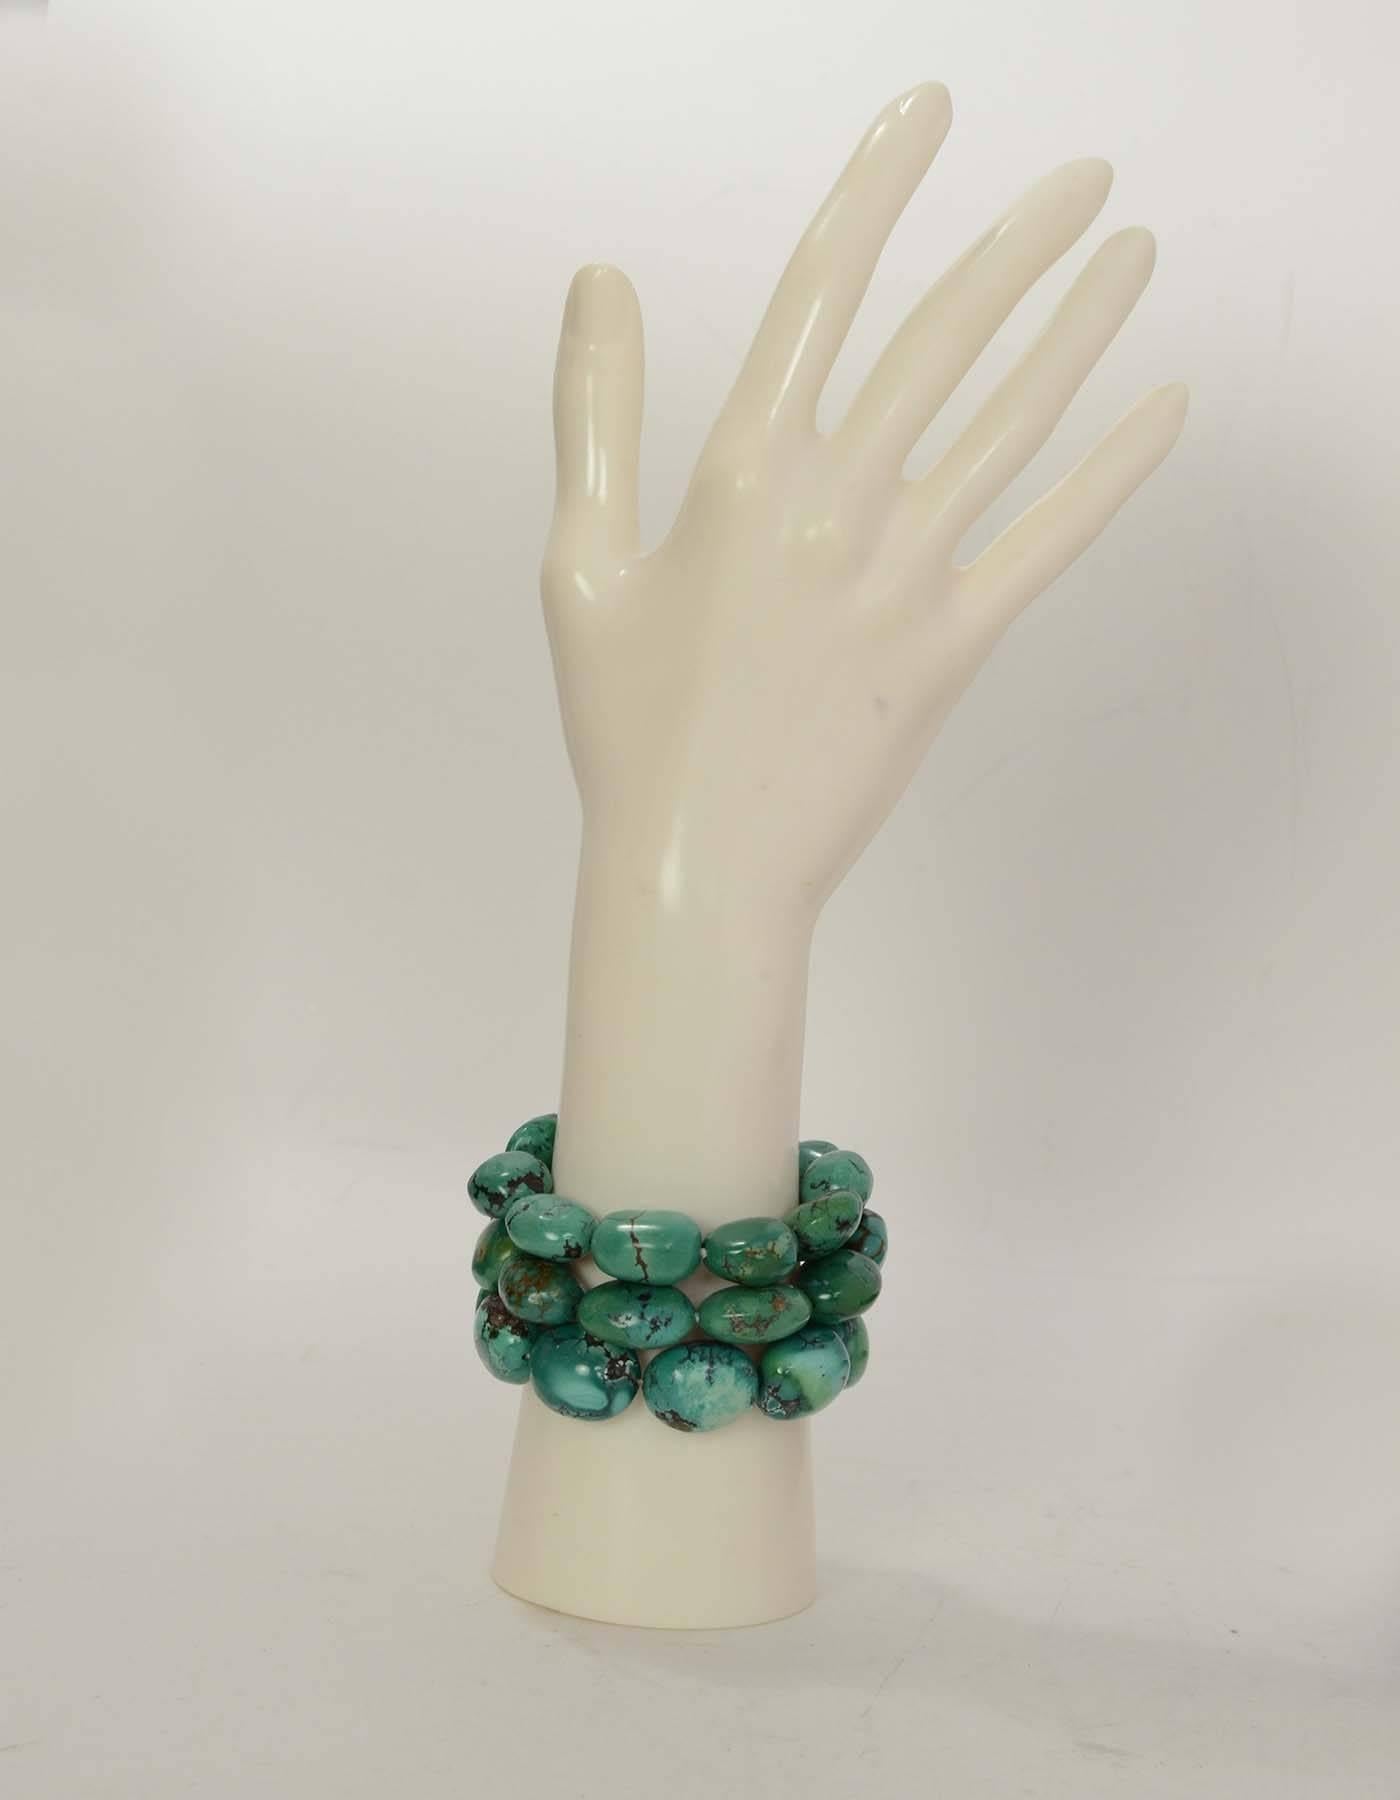 Ralph Lauren Turquoise Multi-Strand Bracelet 
Features sterling silver clasp
Color: Turquoise and silver
Materials: Sterling silver and stone
Closure: Sliding bar clasp
Stamp: 